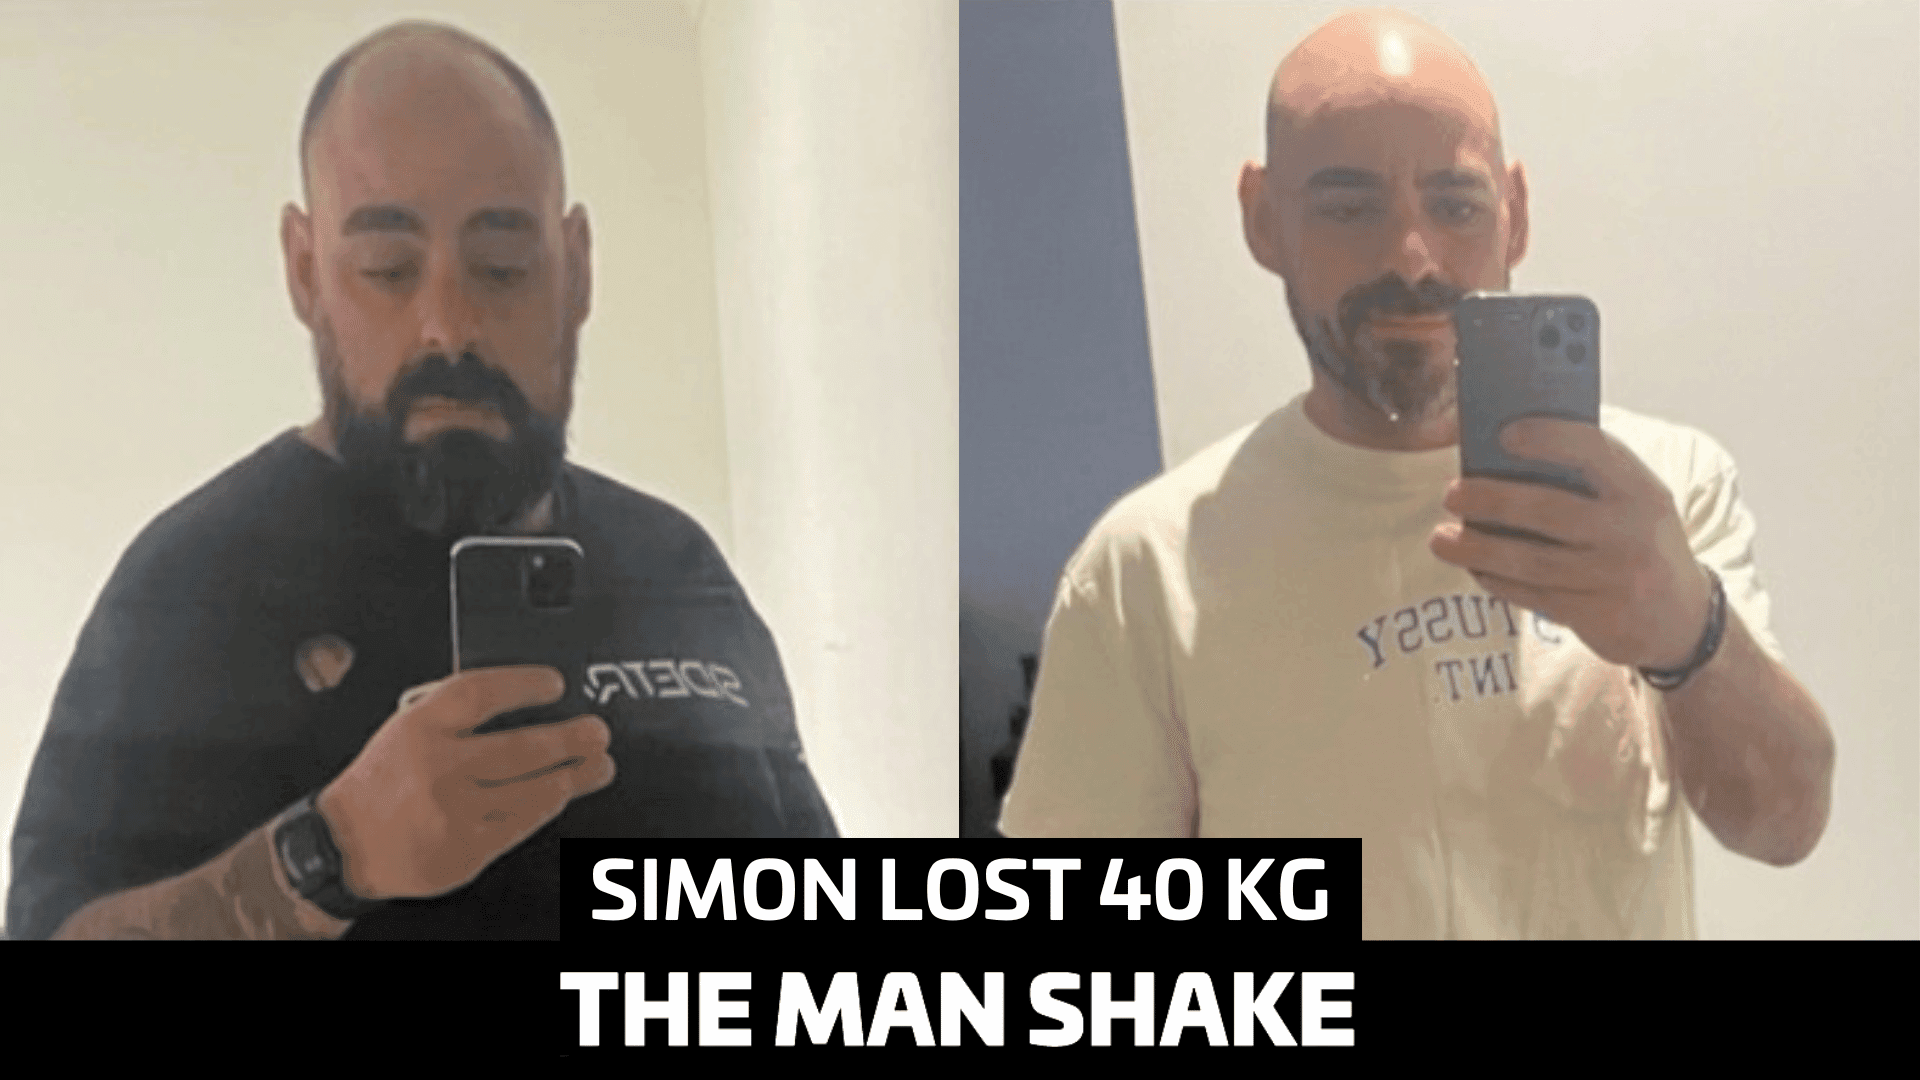 An International Holiday Made Simon Want to Change his Life and Lose 40kgs!